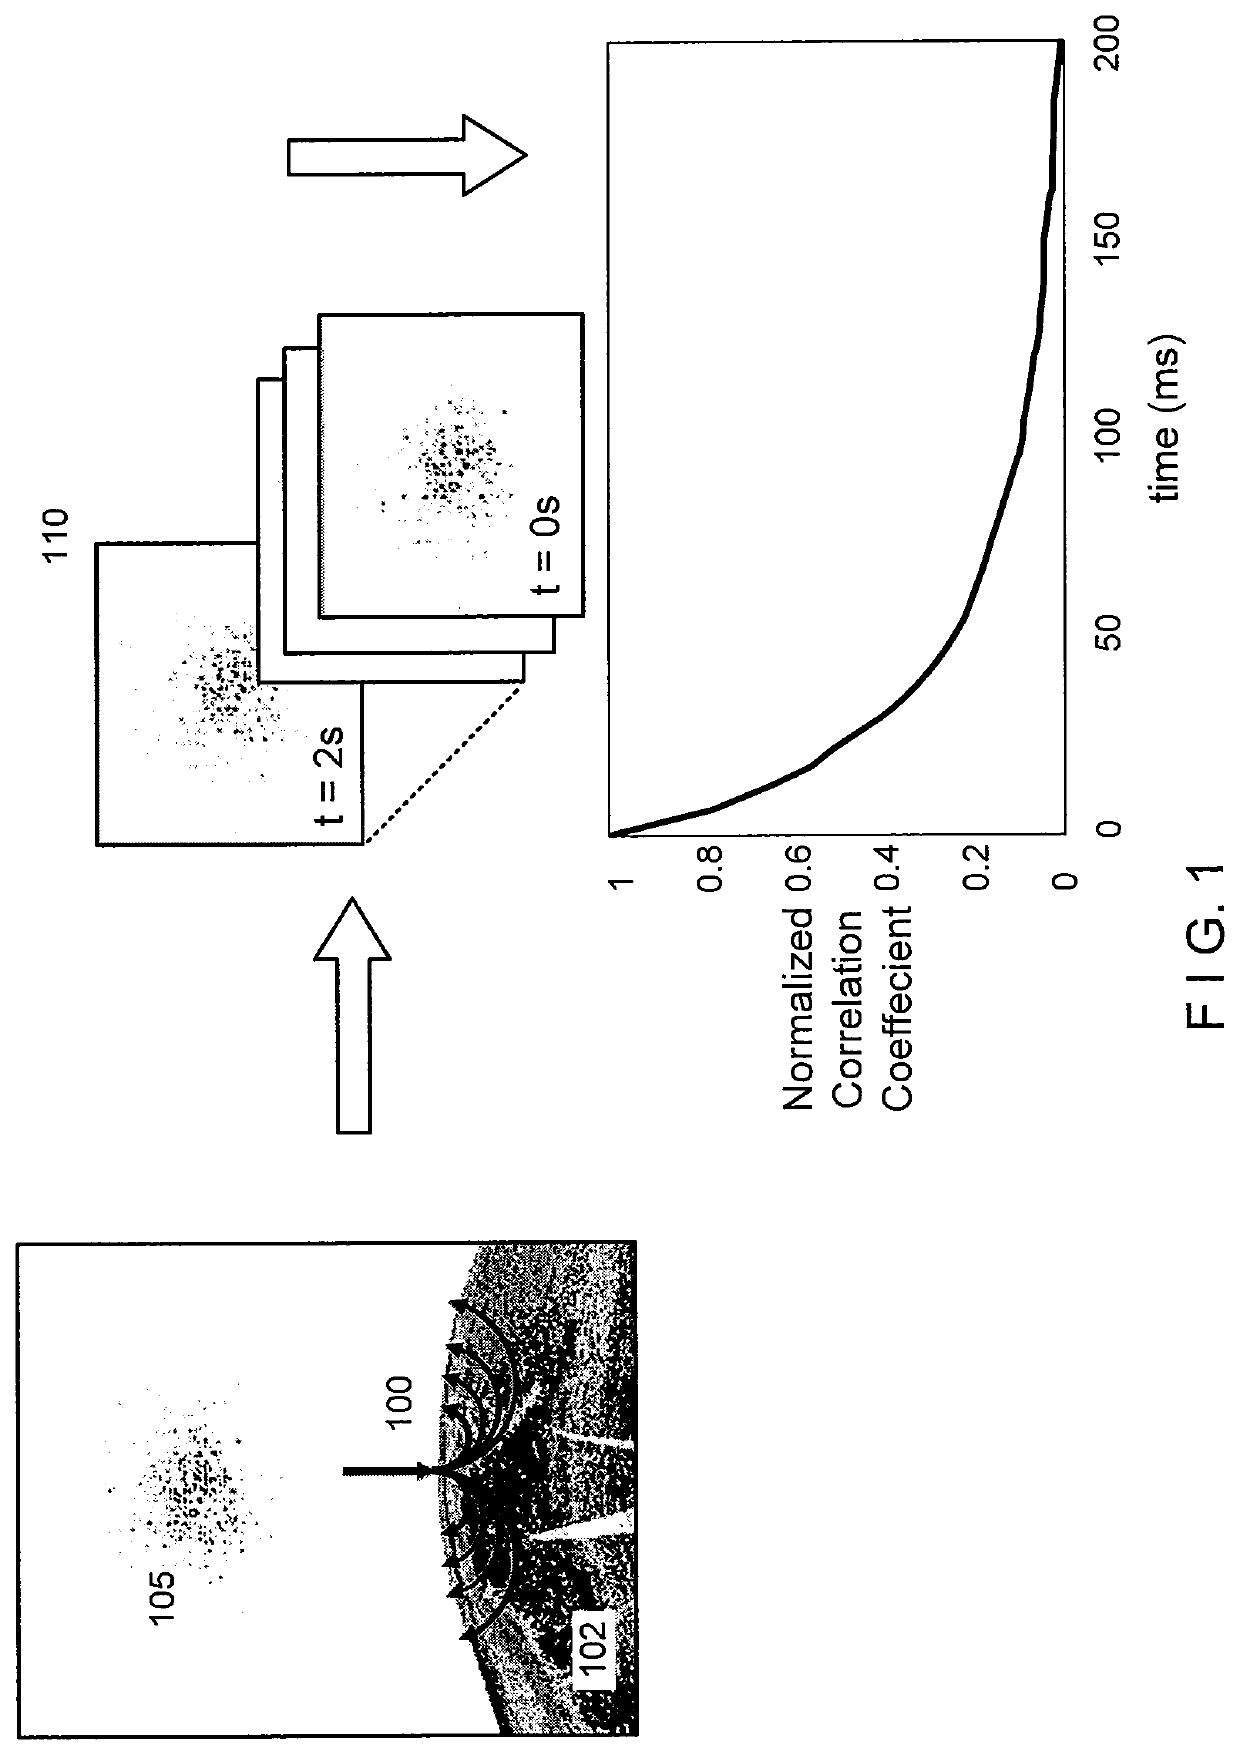 System and method providing intracoronary laser speckle imaging for the detection of vulnerable plaque